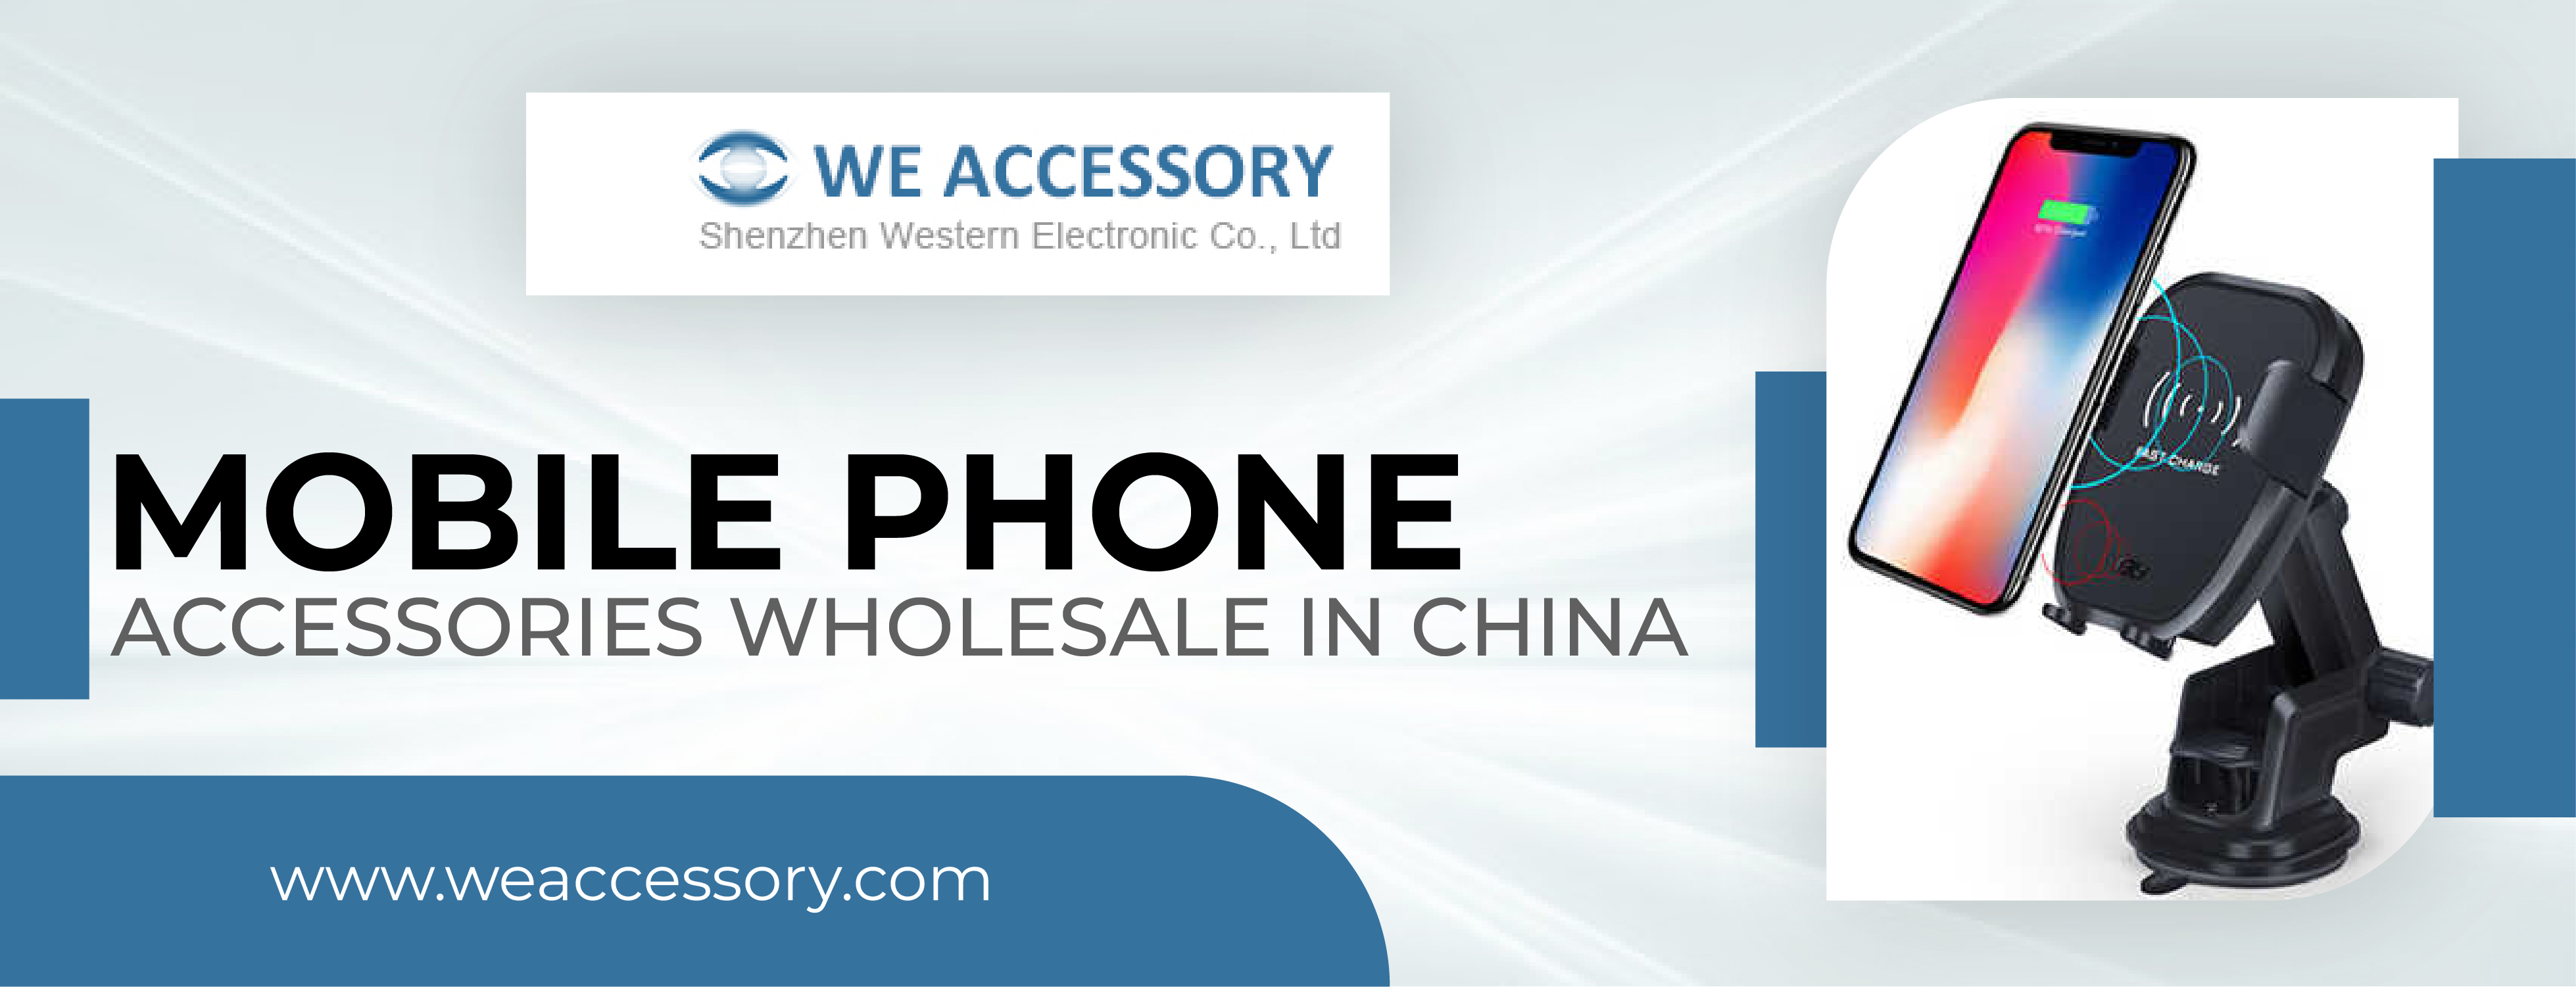 mobile phone accessories wholesale china